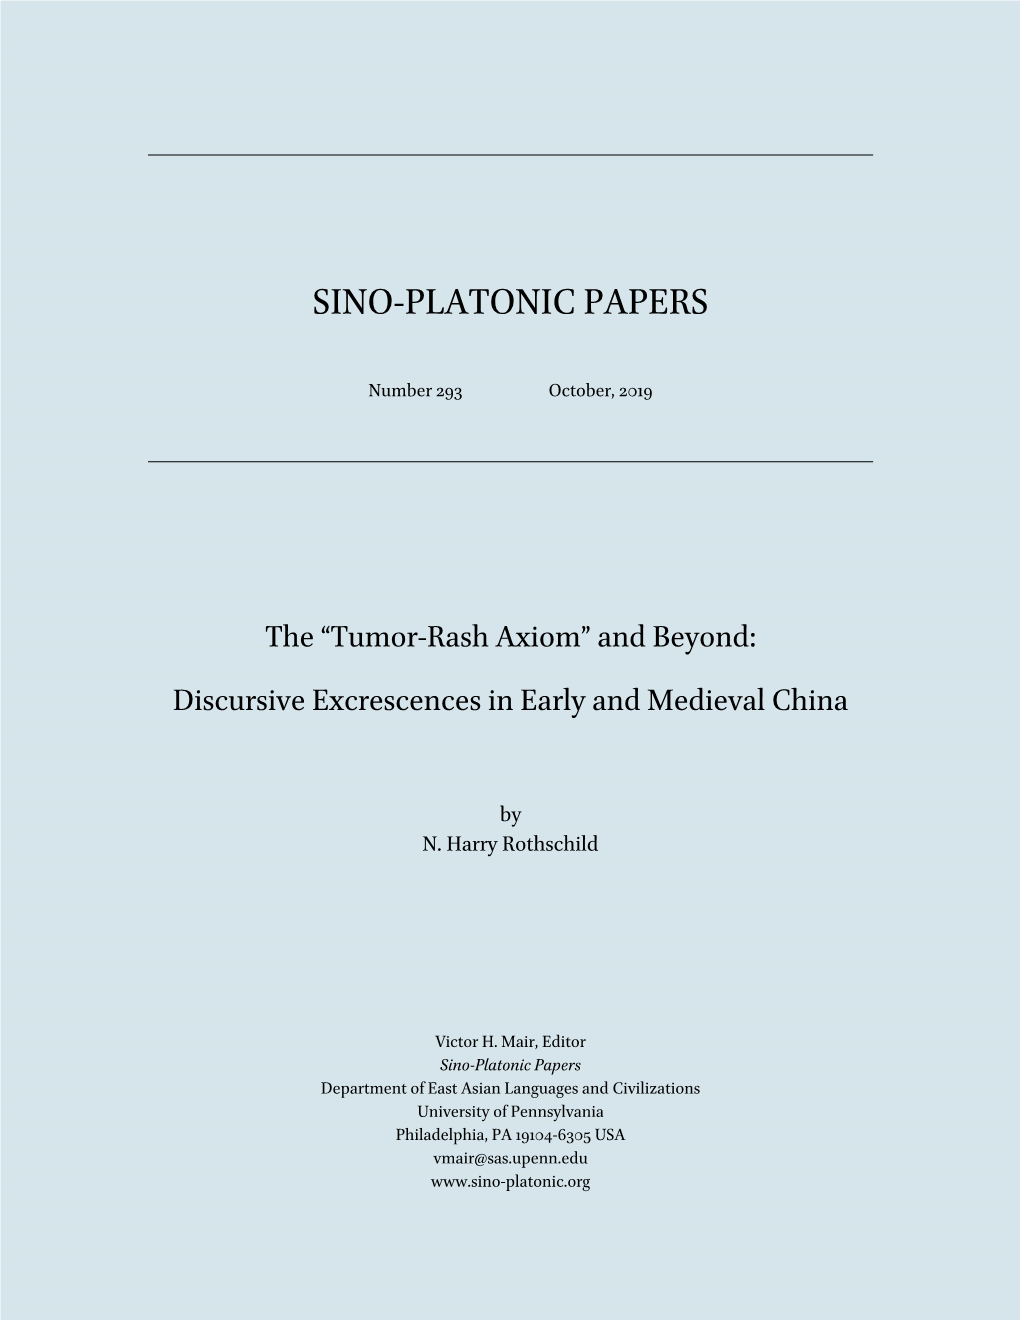 “Tumor-Rash Axiom” and Beyond: Discursive Excrescences in Early and Medieval China